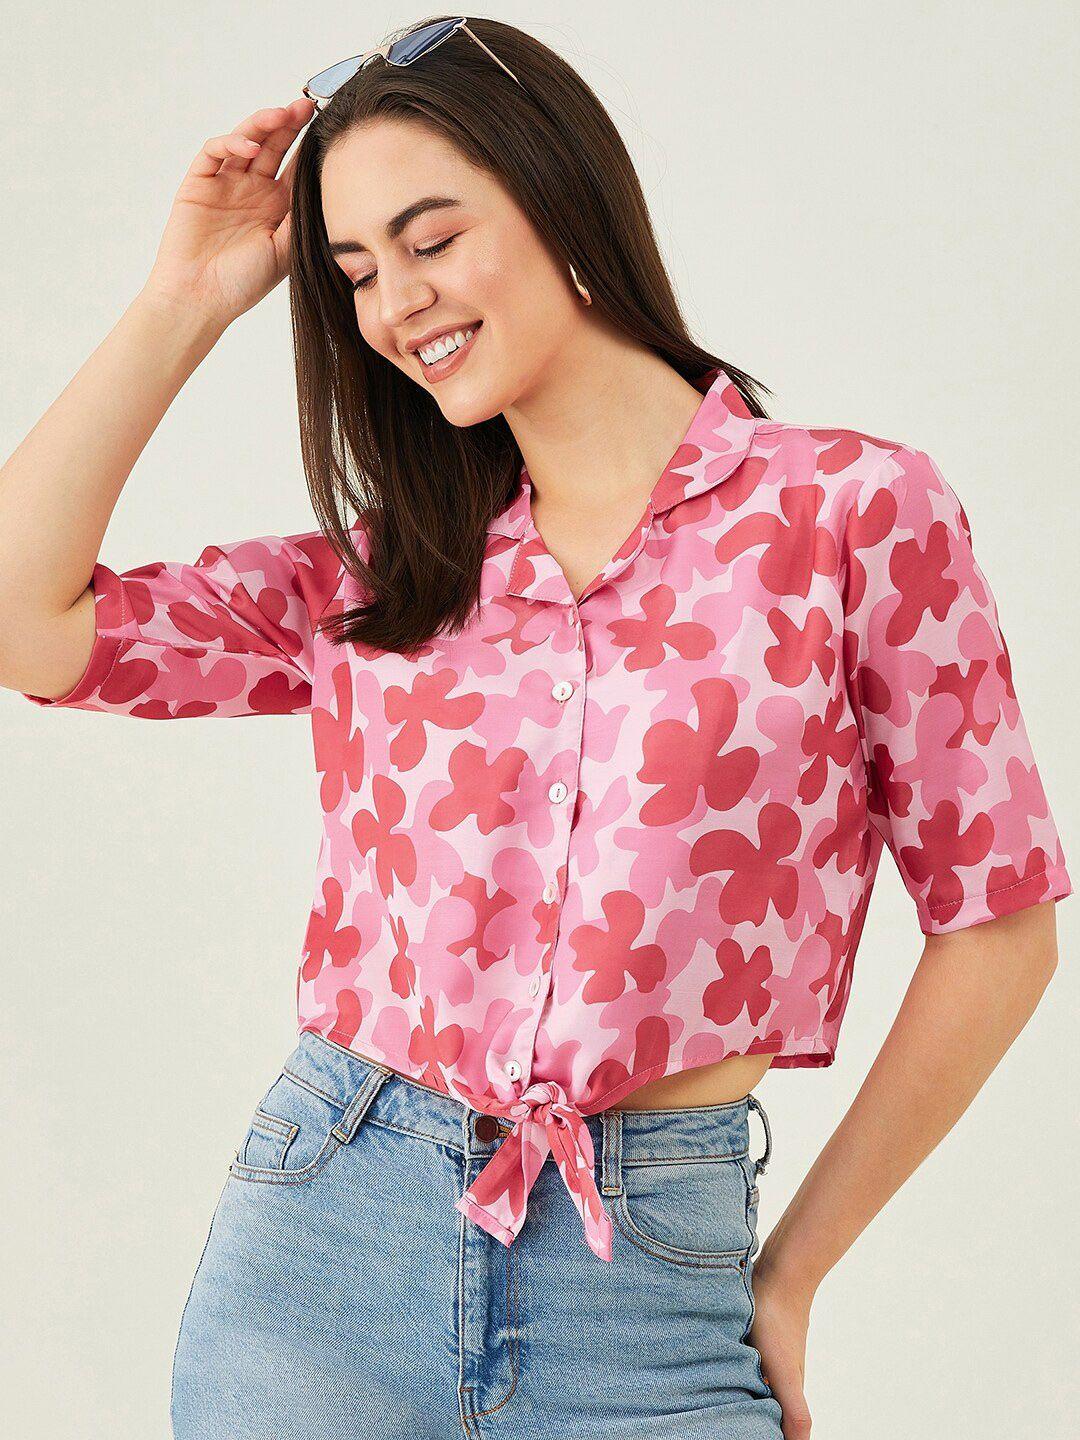 modeve floral printed front knot shirt style crop top